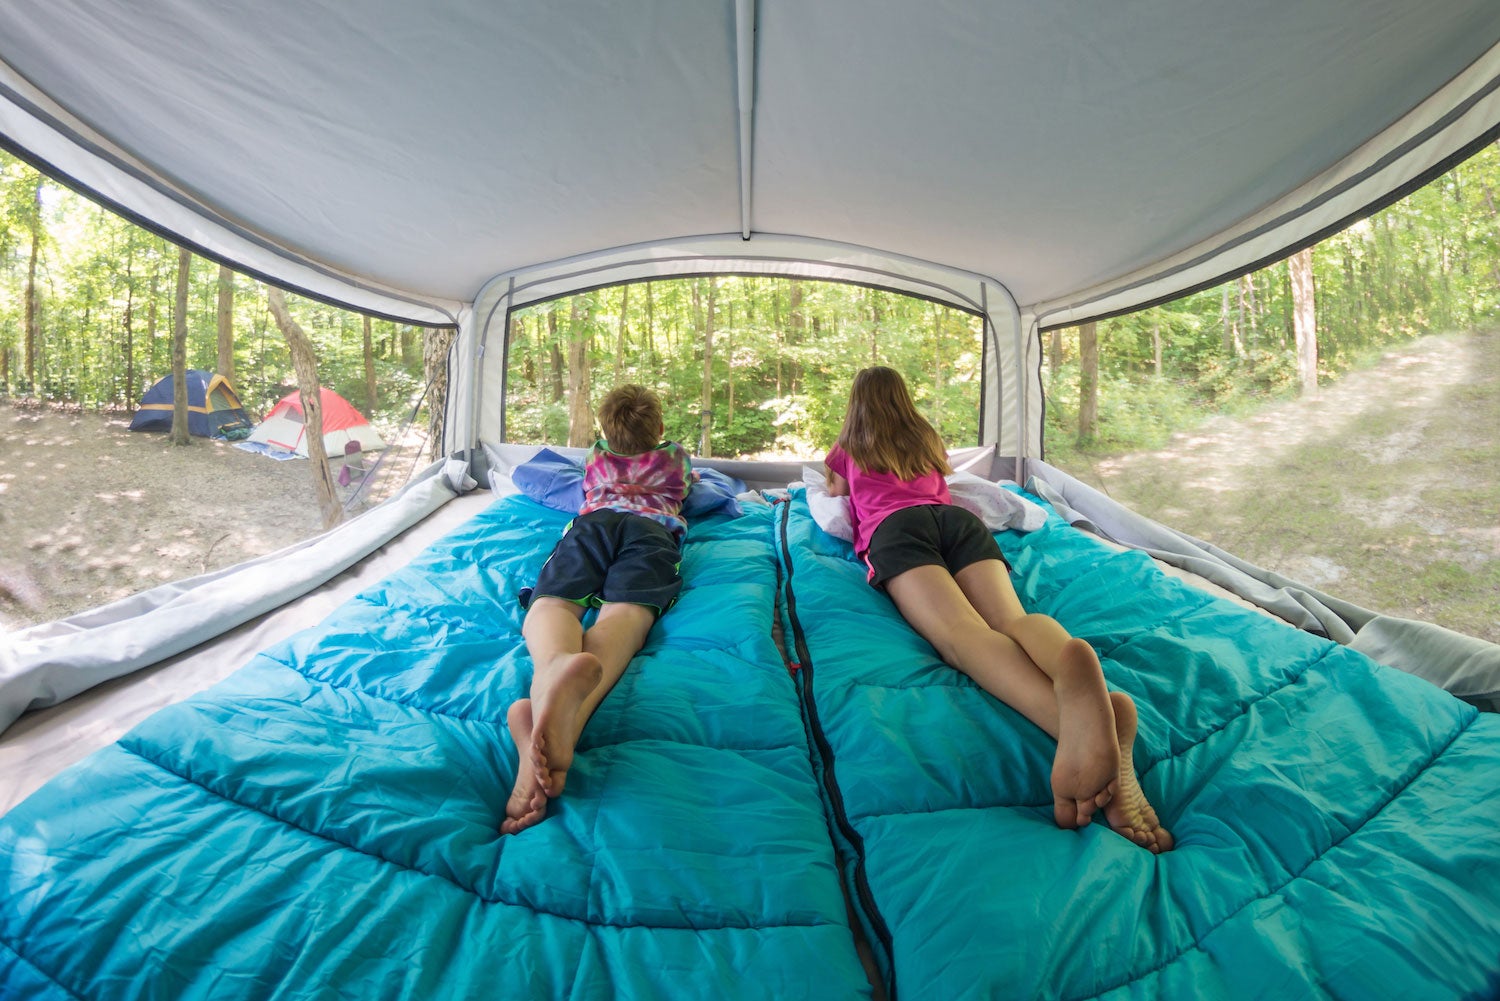 These 7 Pop-Up Campers Are Surprisingly Roomy and